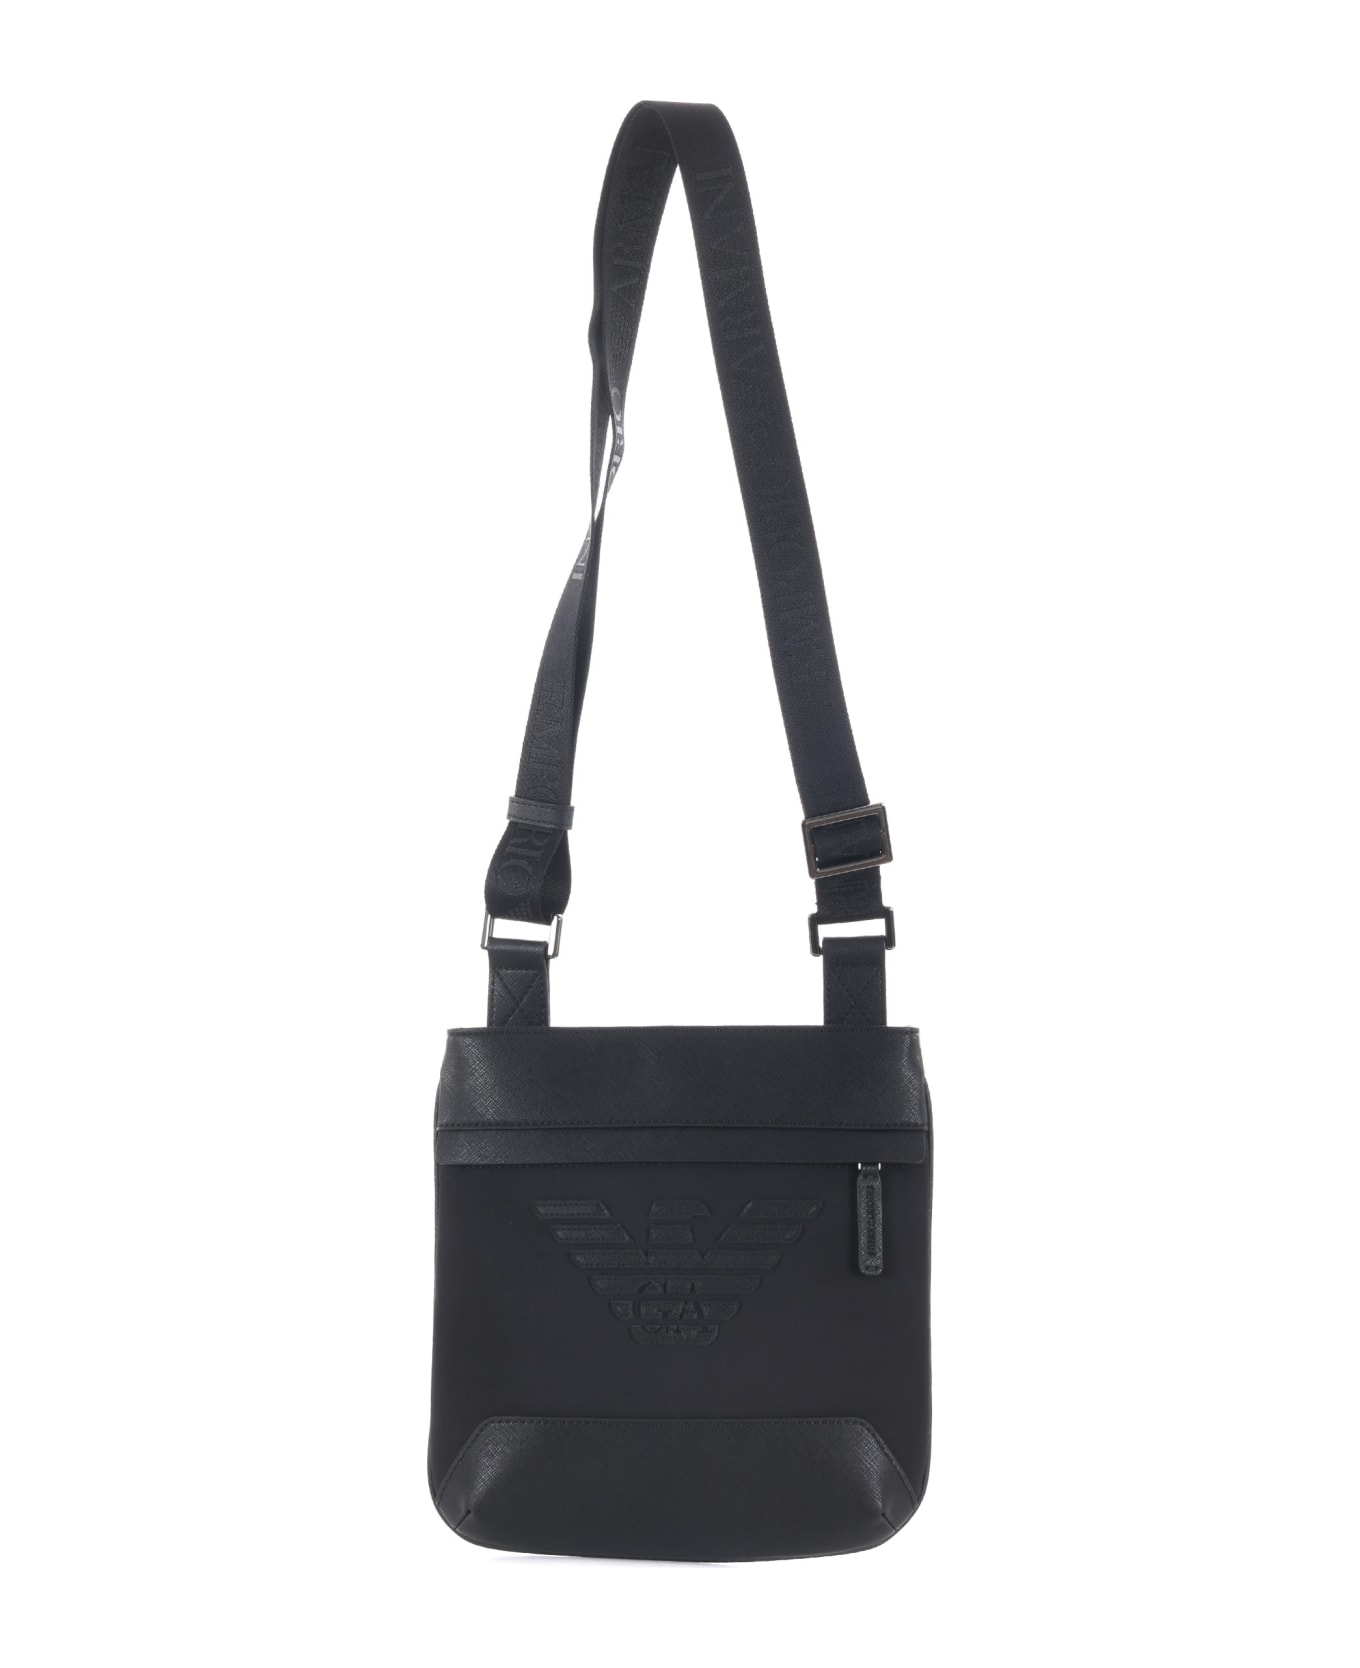 Emporio Armani Shoulder Bag From The 'sustainable' Collection - Black ショルダーバッグ